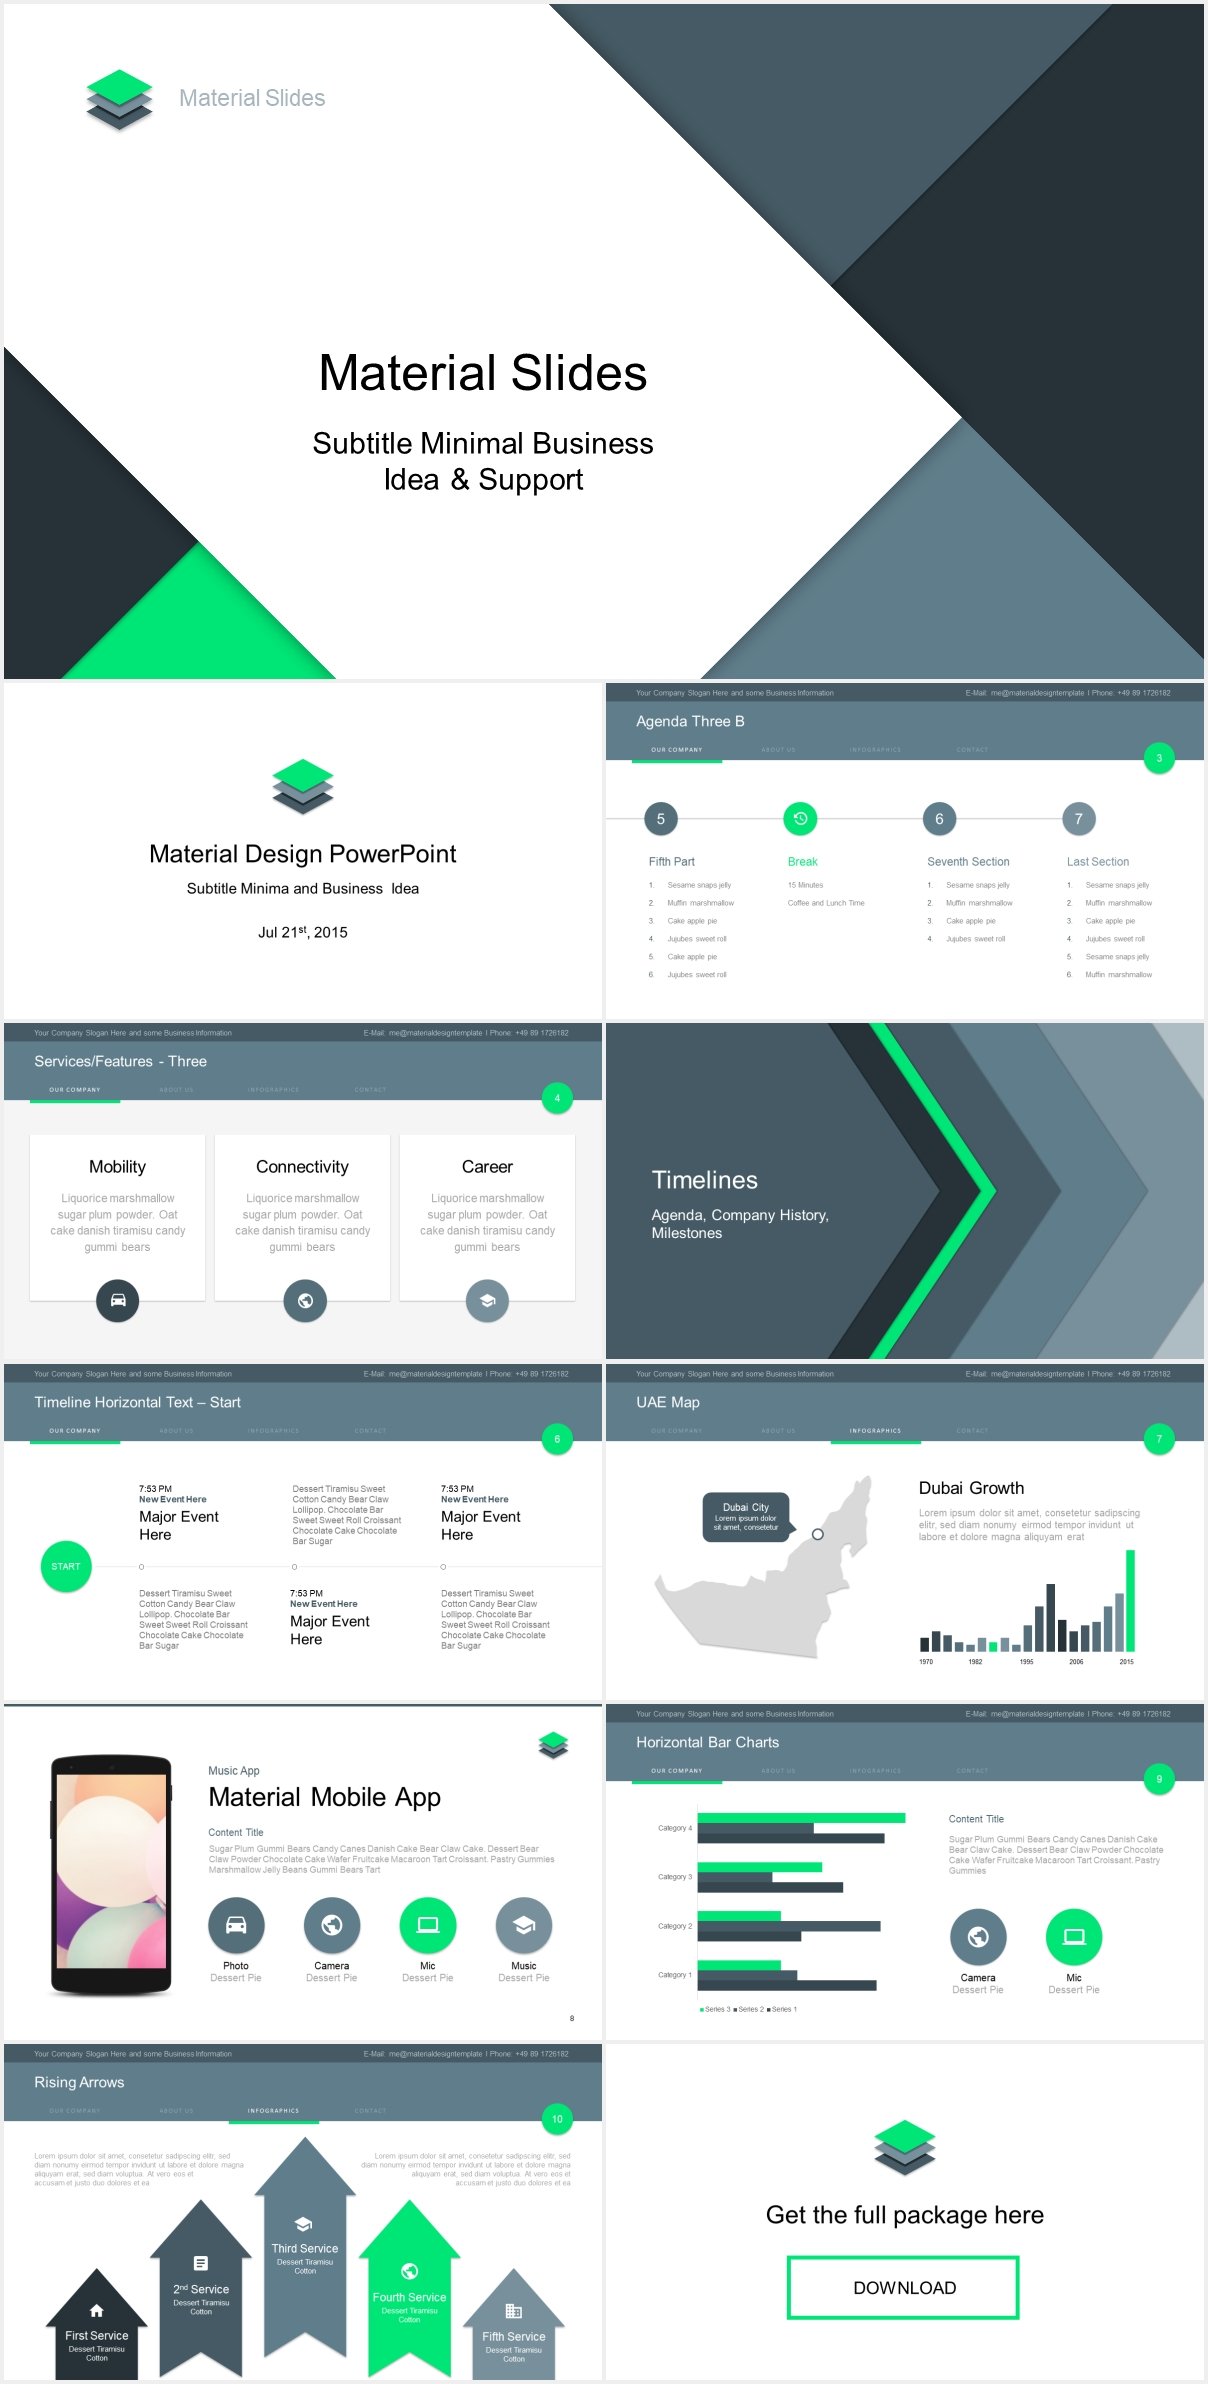 Material Design PowerPoint Template Just Free Slide